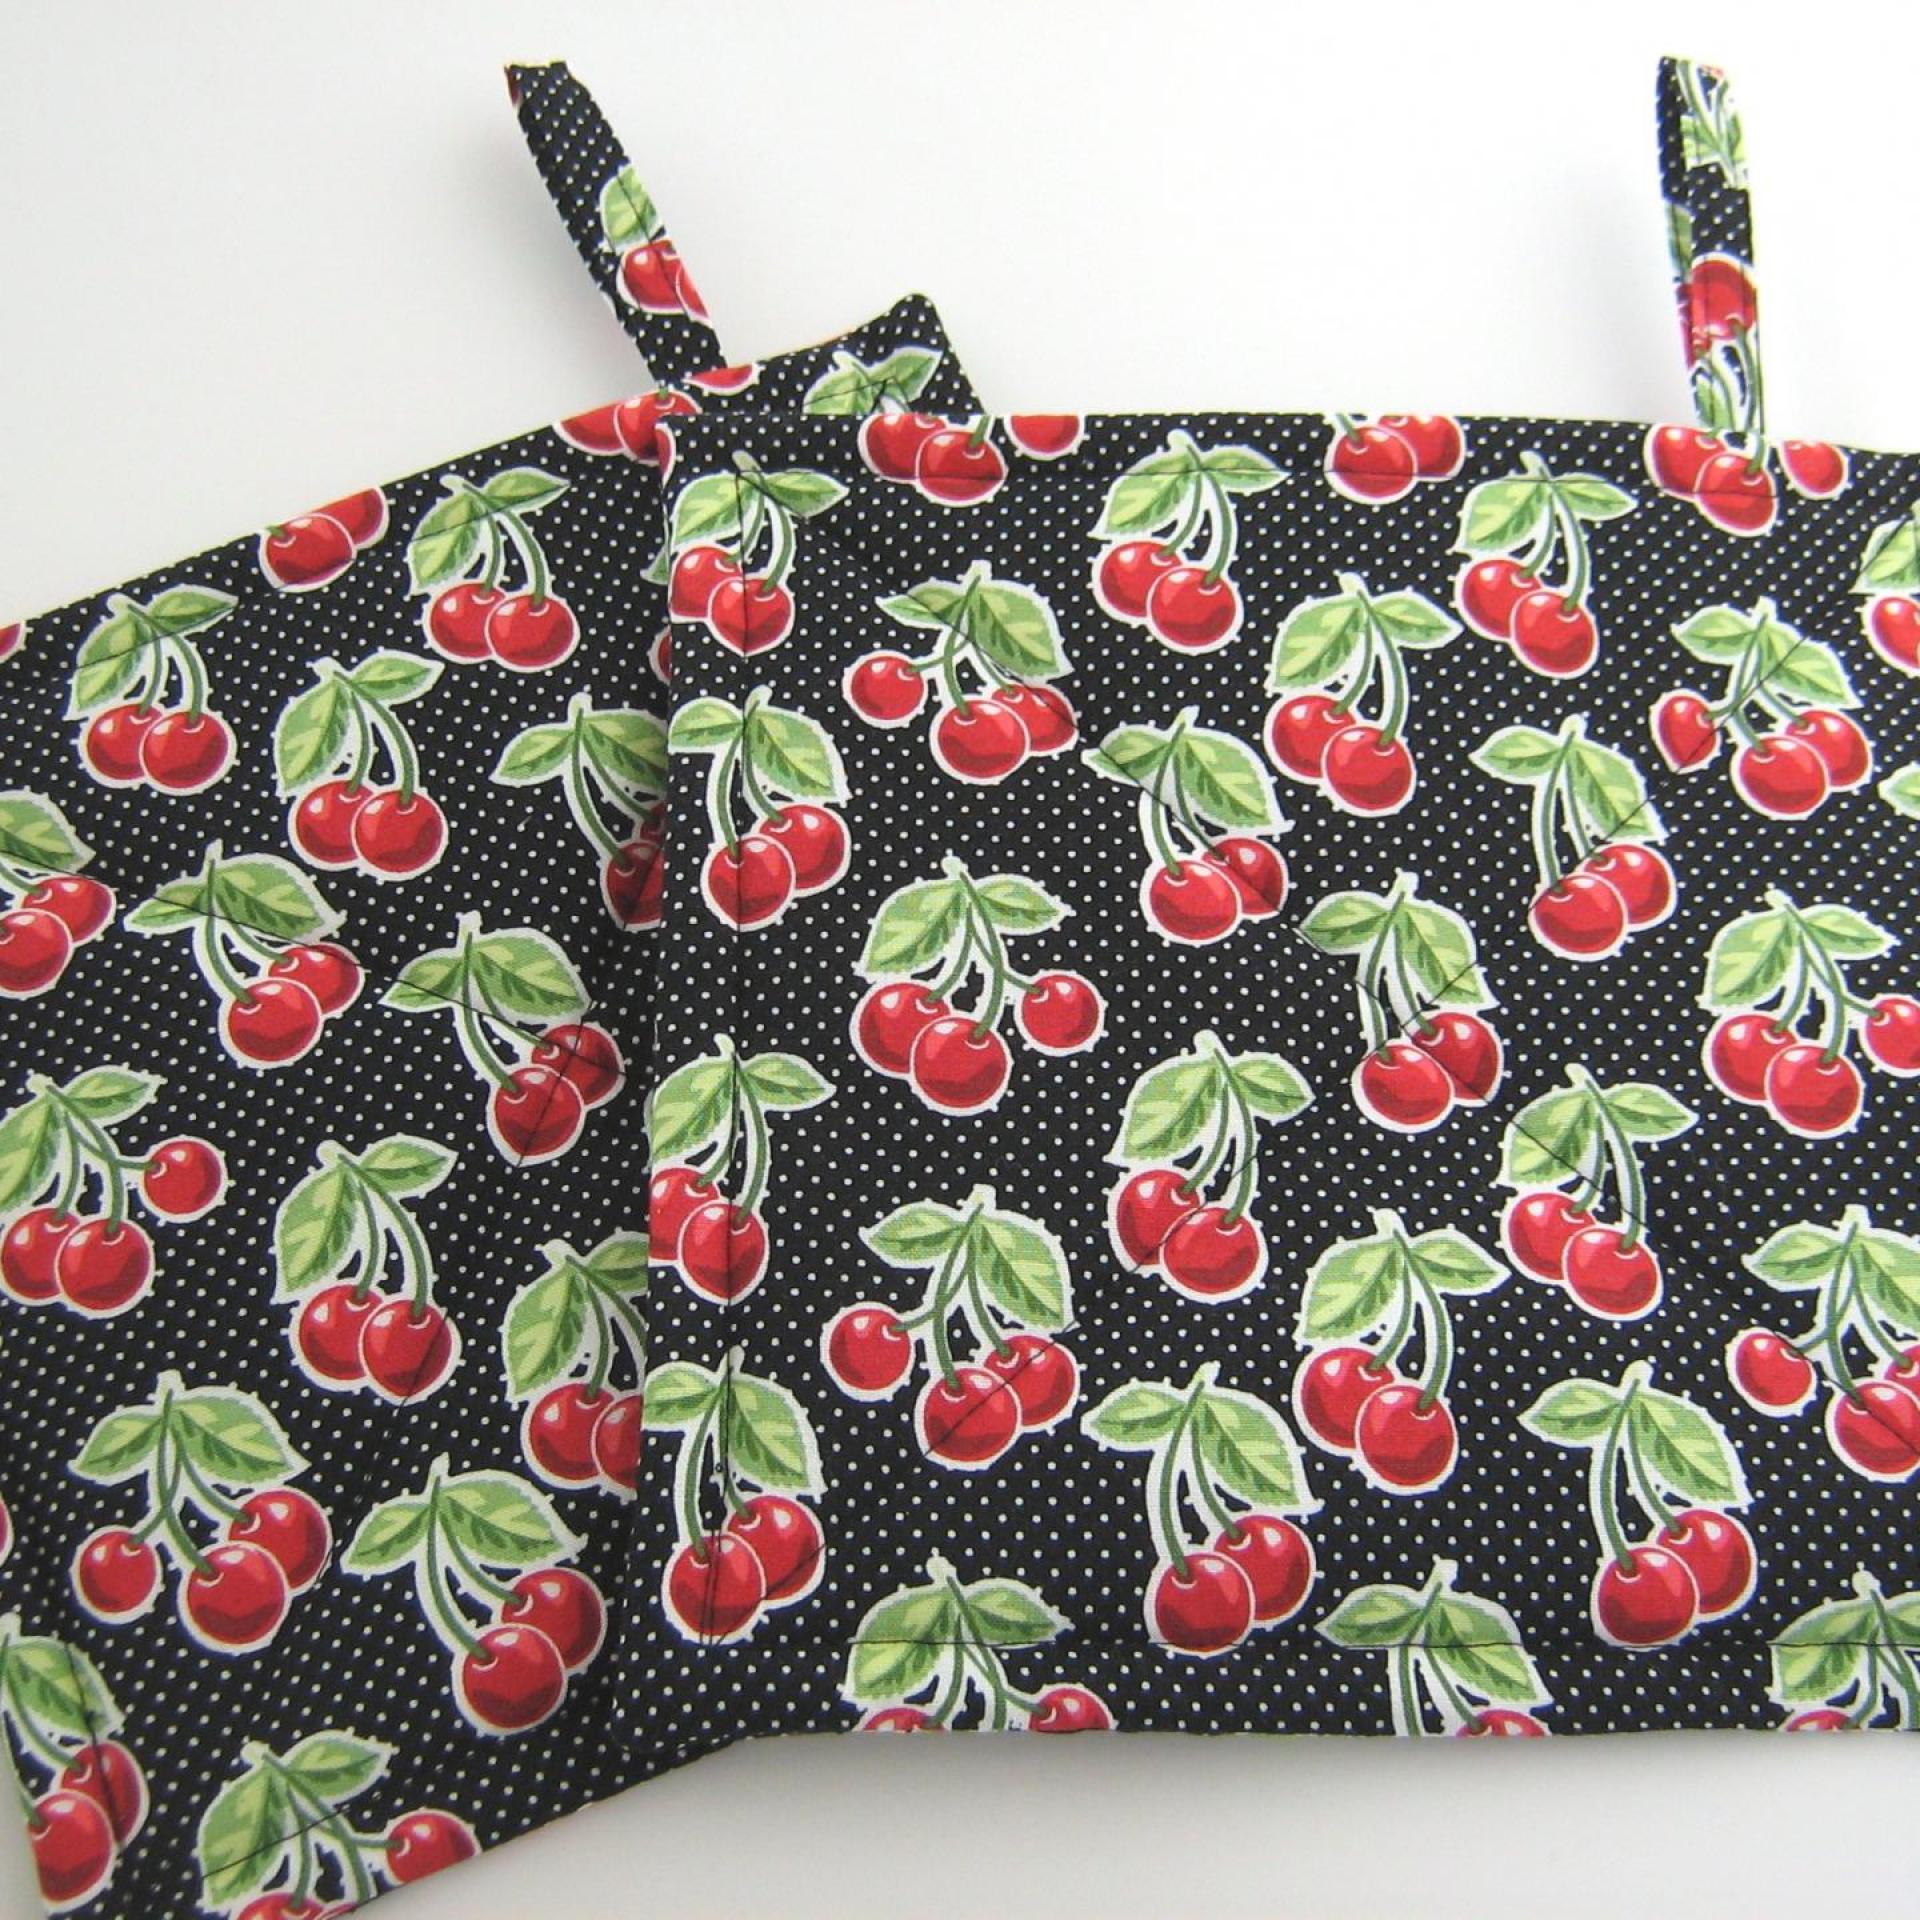 Cherries and Polka Dots Potholders, Red Black Retro Look Quilted Handmade Hot Pads, Housewarming Gift 